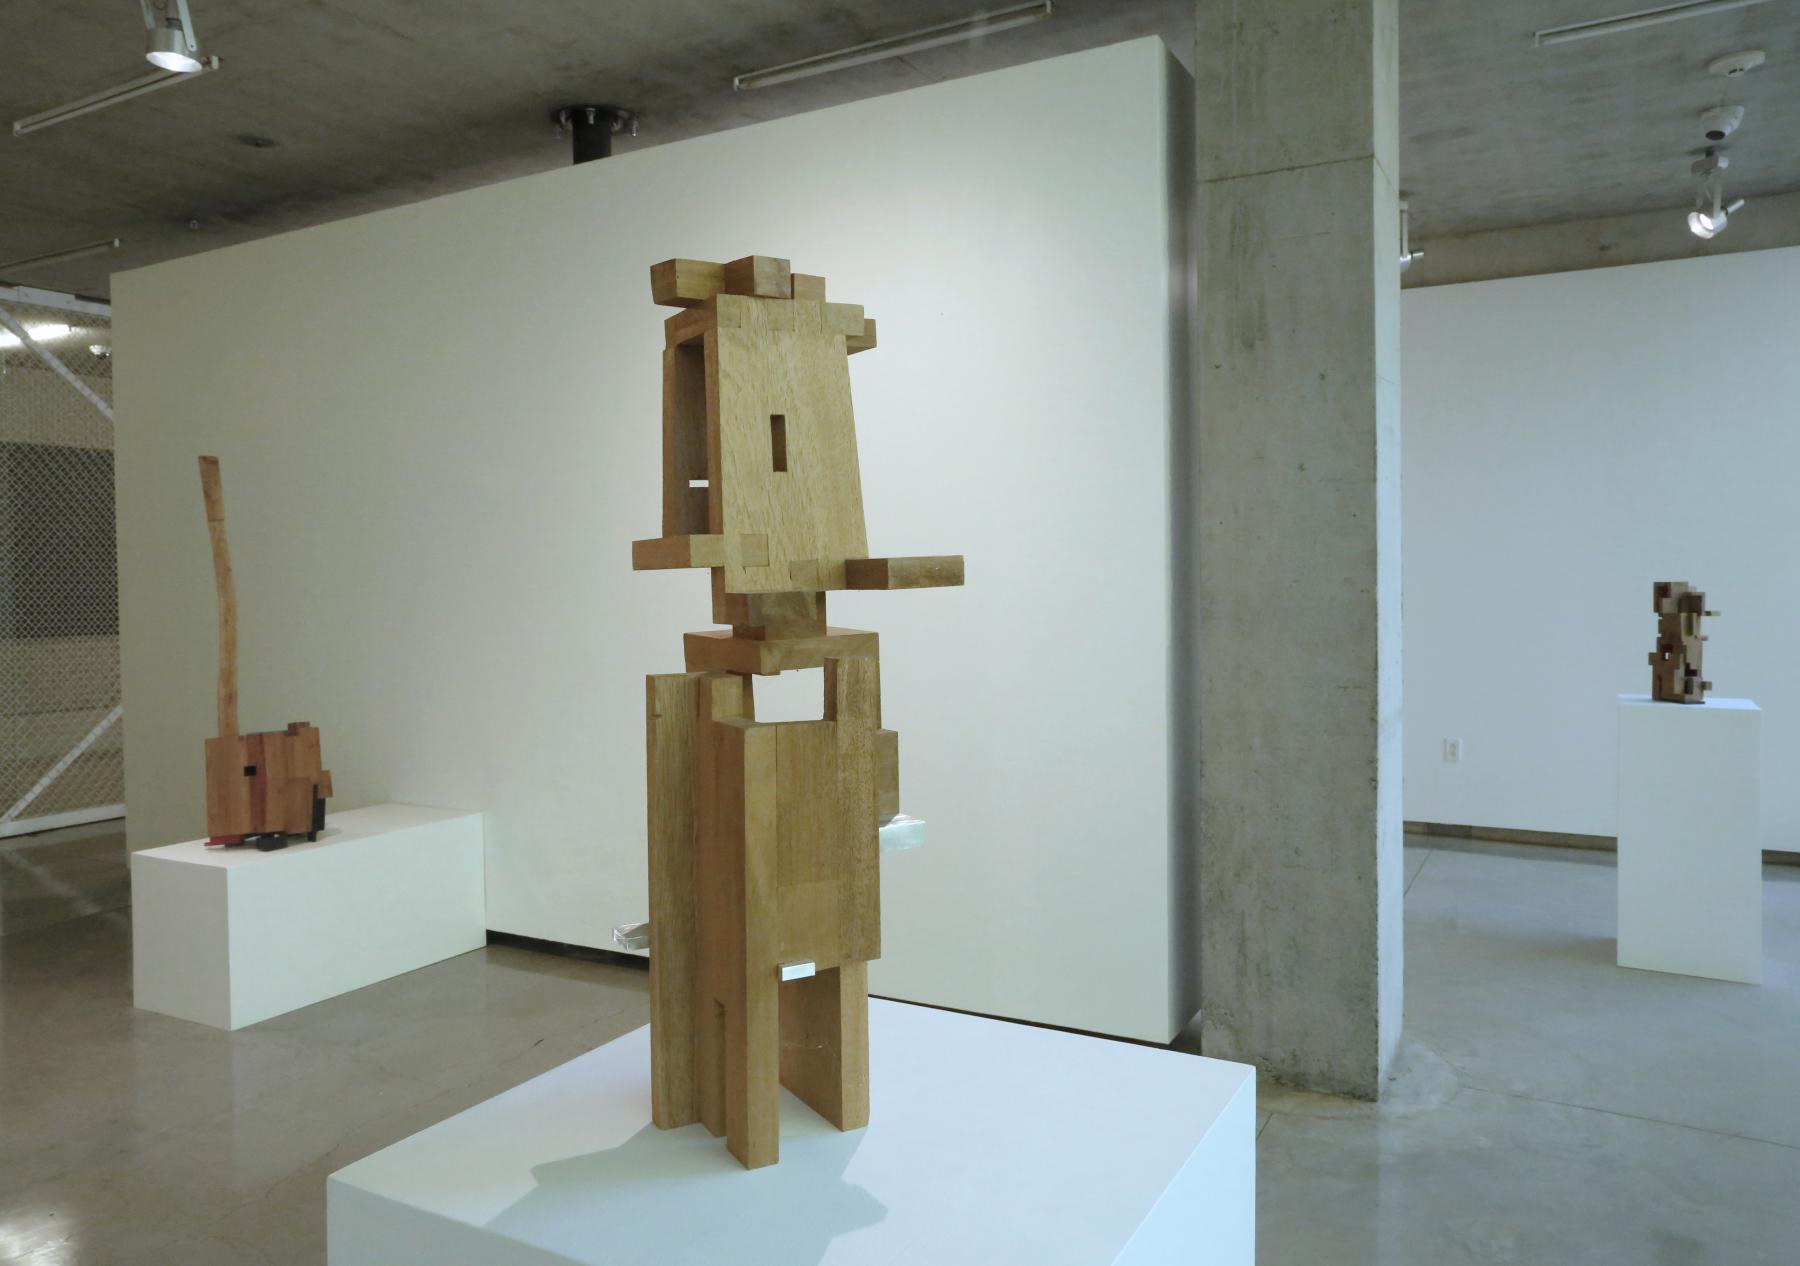 Abstract wooden sculpture piece with various sized rectangular pieces put together displayed on white pedestals. 